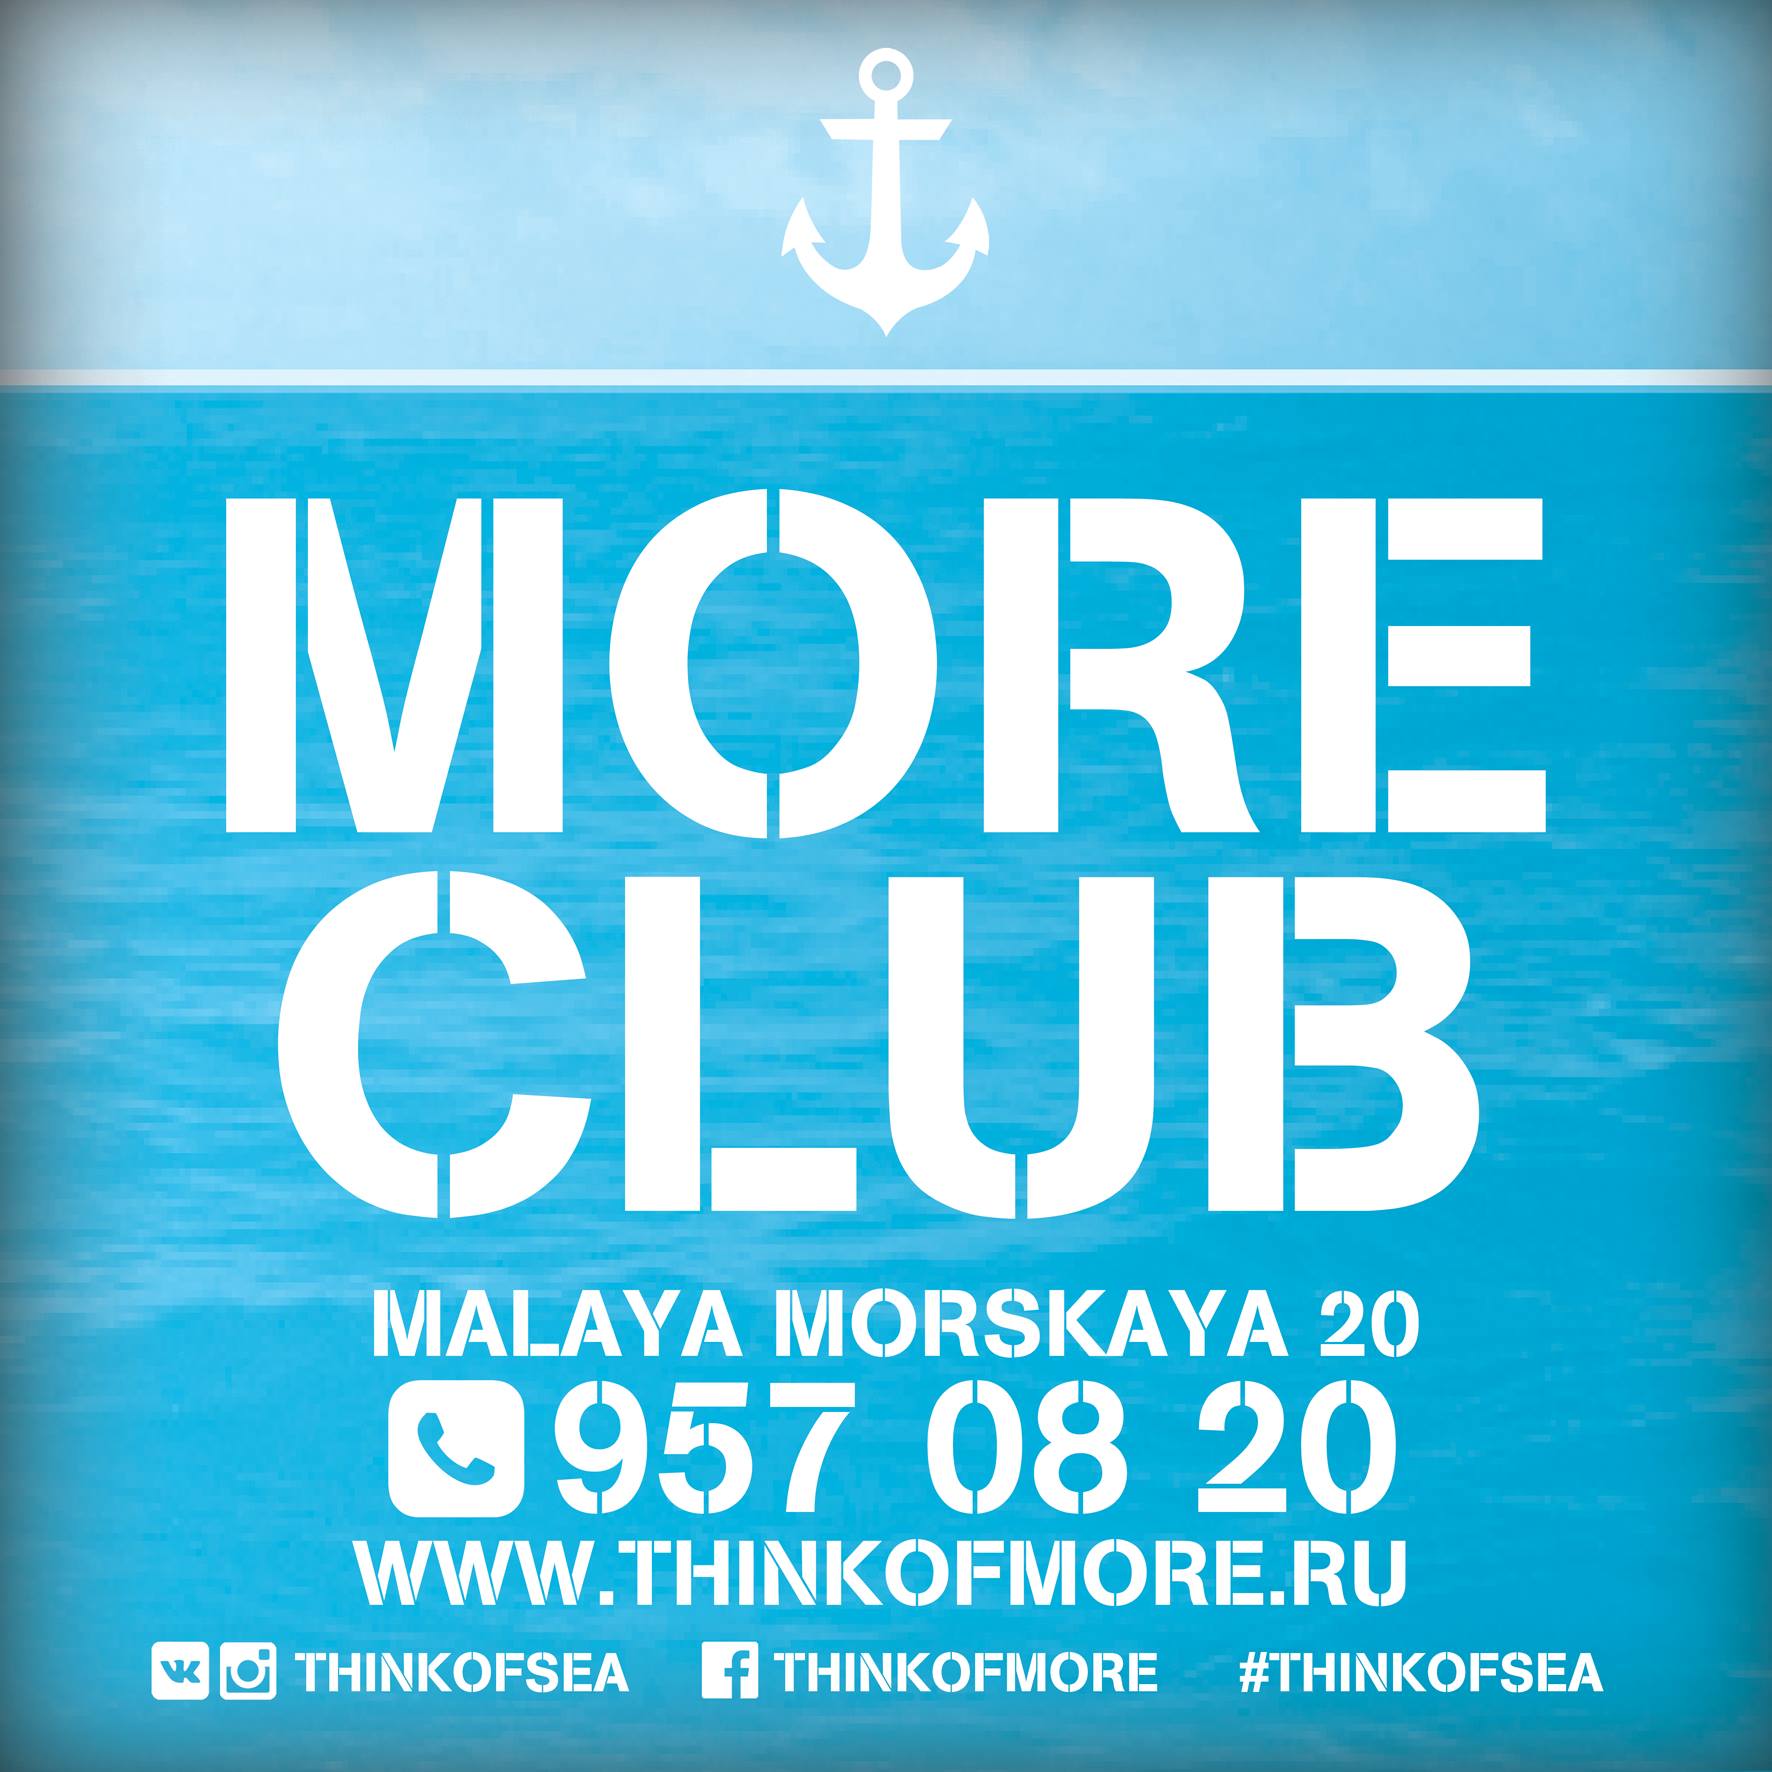 More and more sing. More is more журнал. More more аут. Морская вечеринка афиша. Drop клуб.